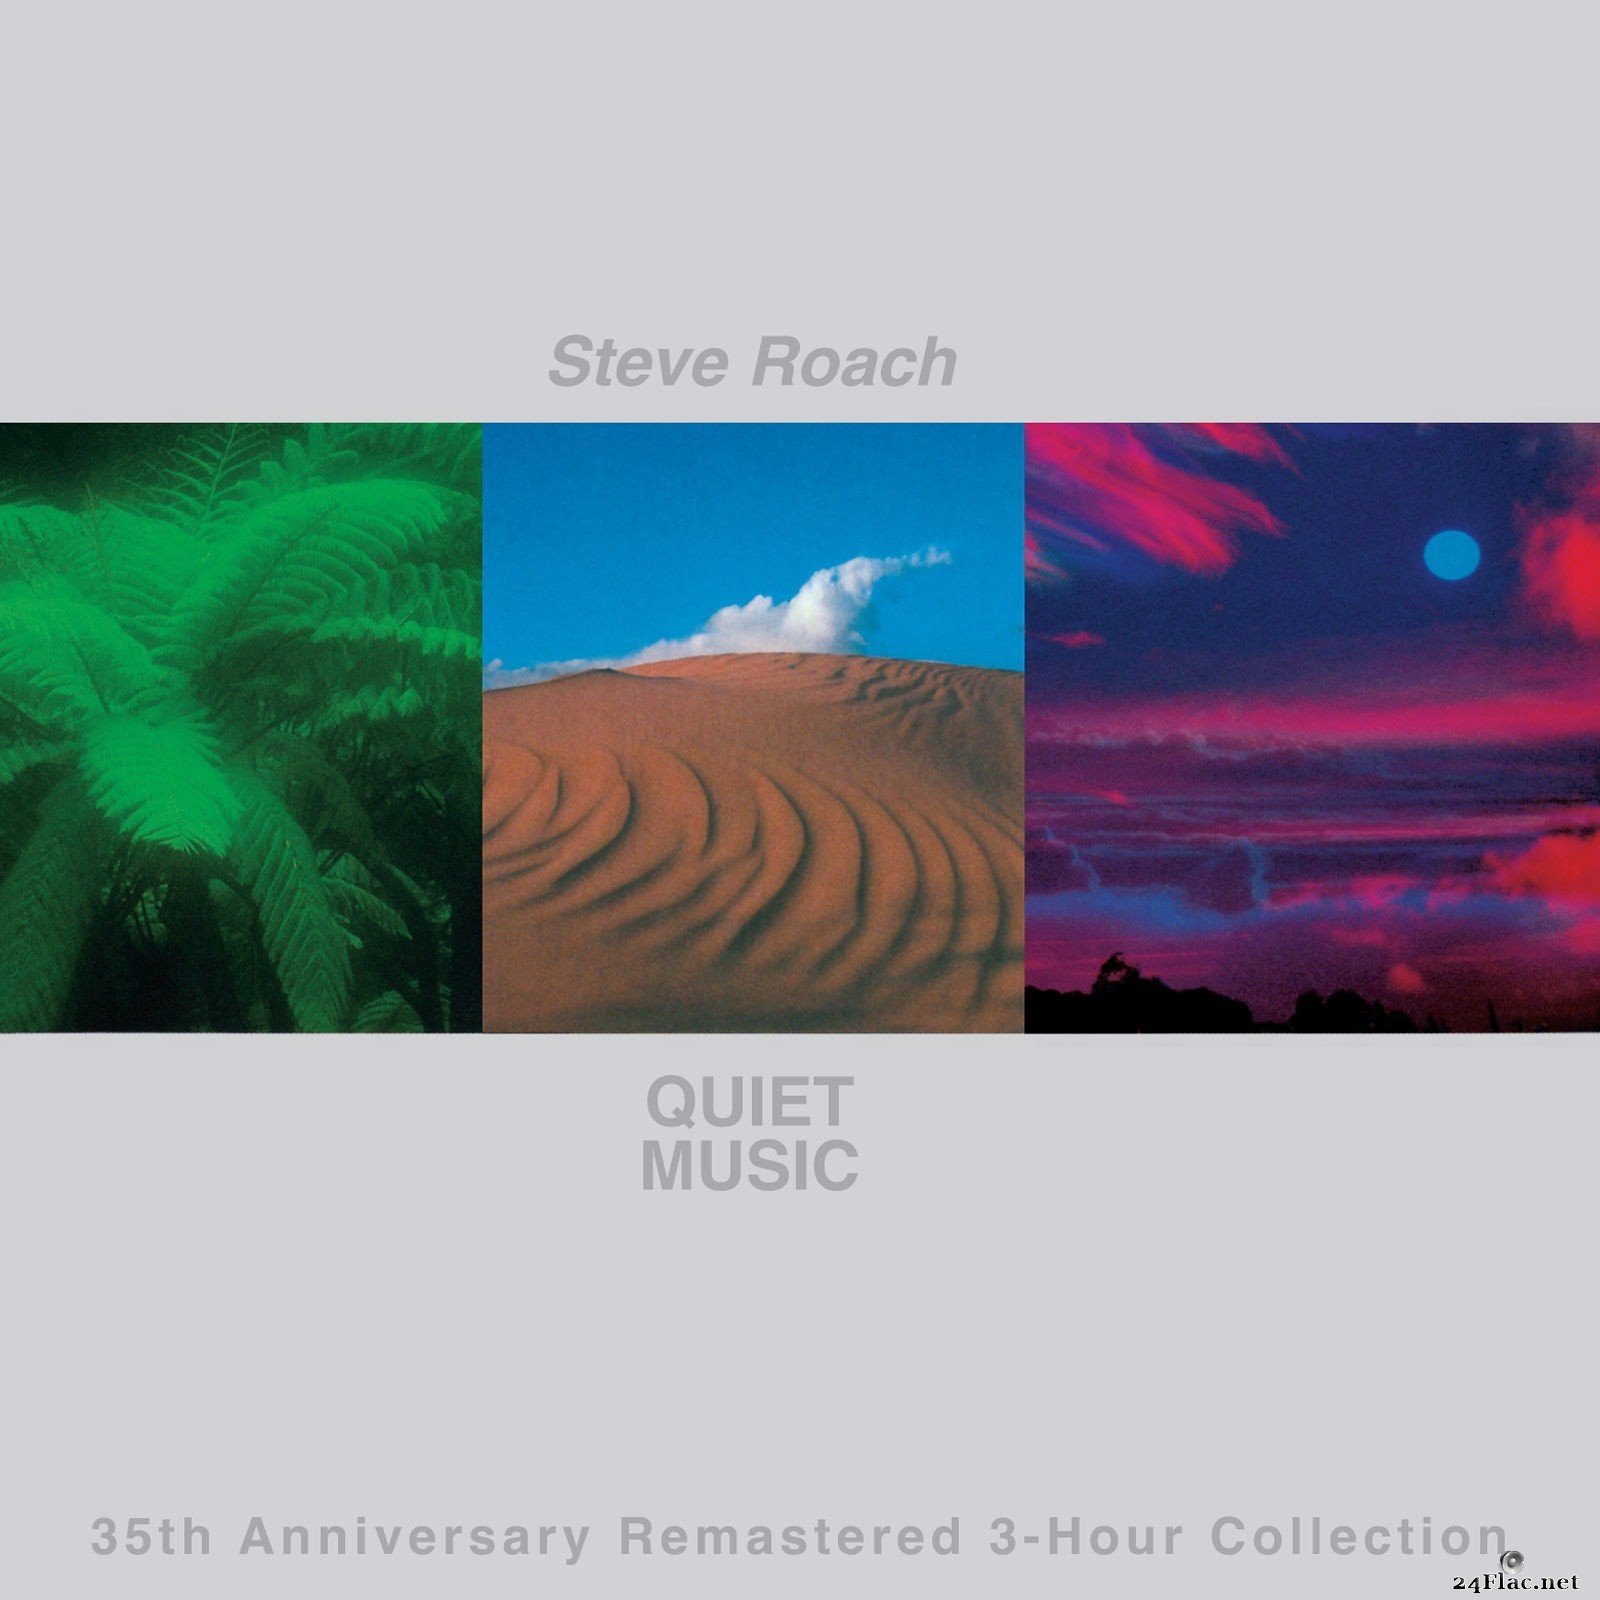 Steve Roach - Quiet Music (35th Anniversary Remastered 3-Hour Collection) (2021) Hi-Res